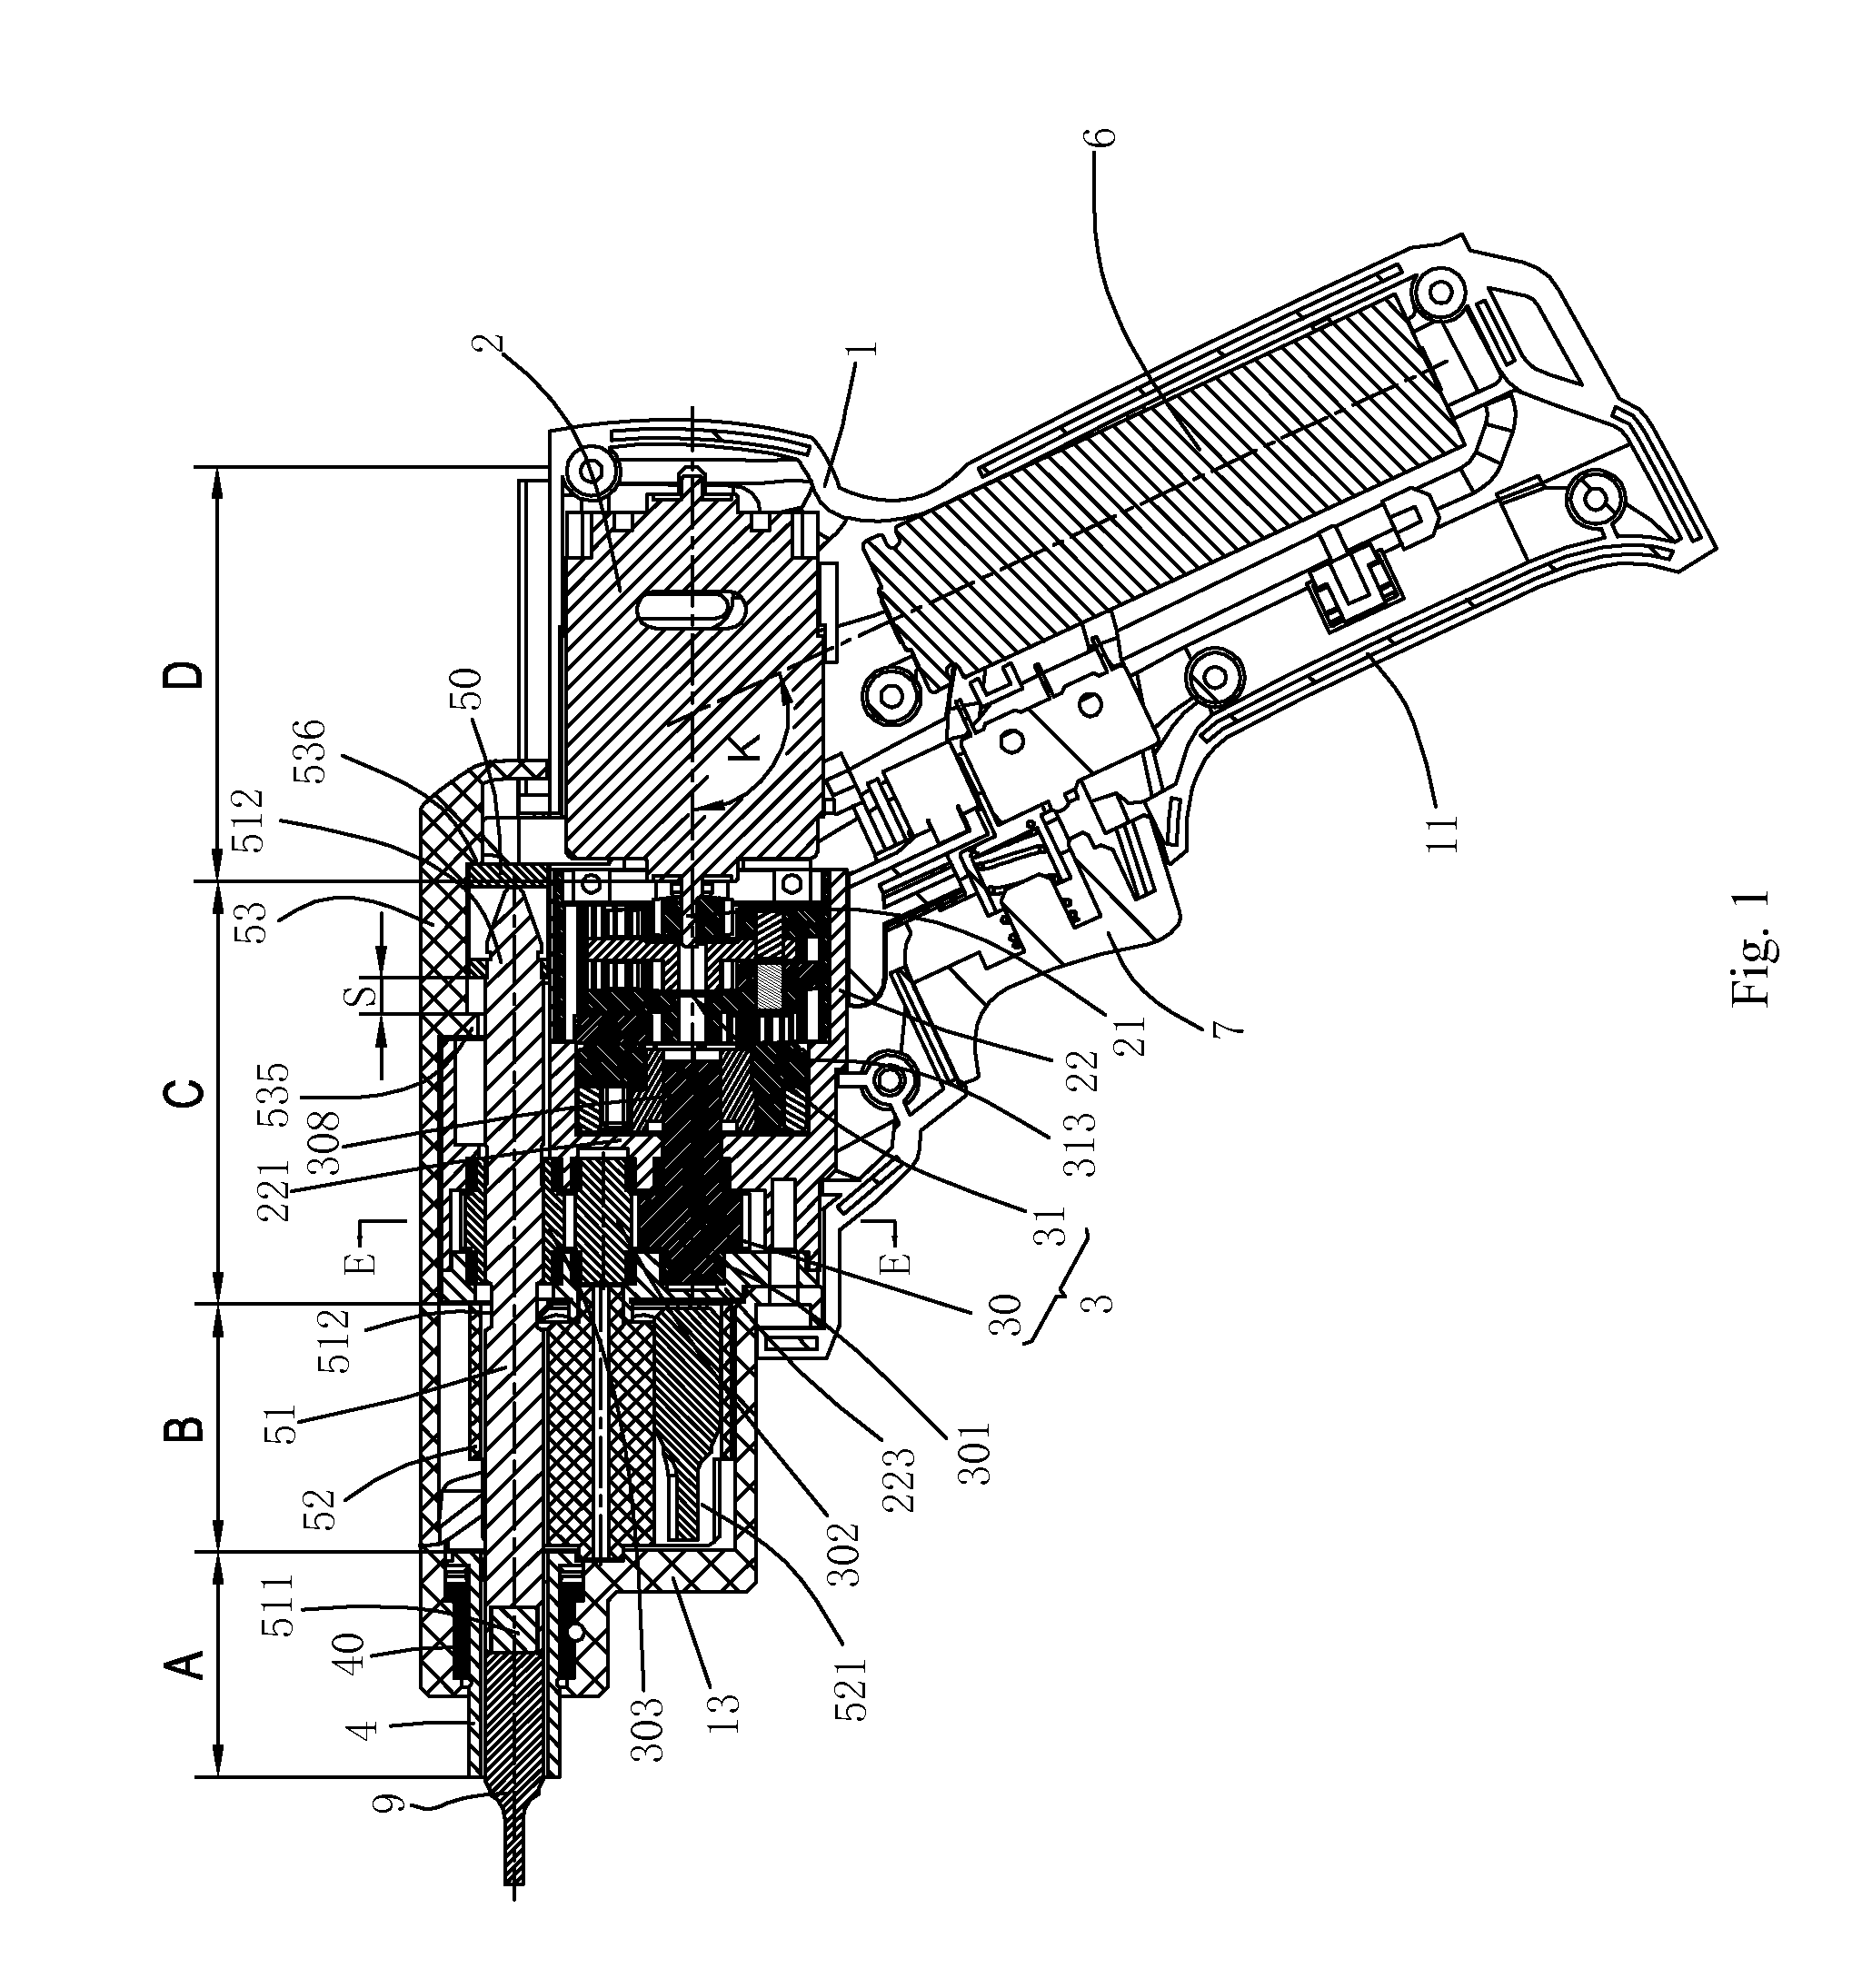 Power tool and operation method for the power tool